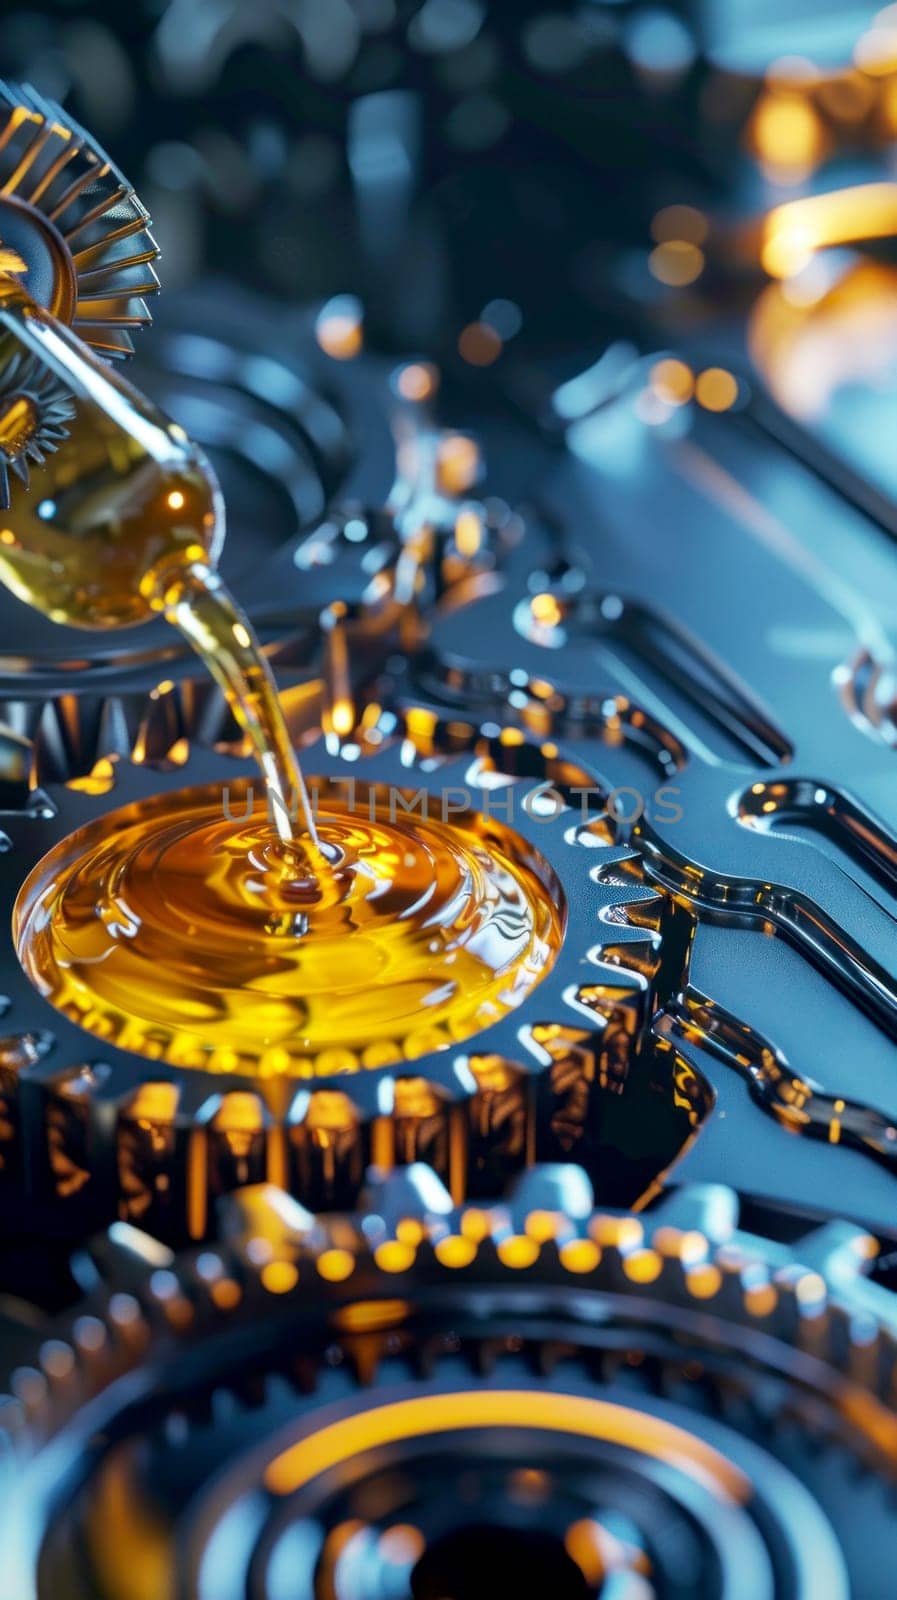 A machine is pouring a thick, golden liquid onto a gear.